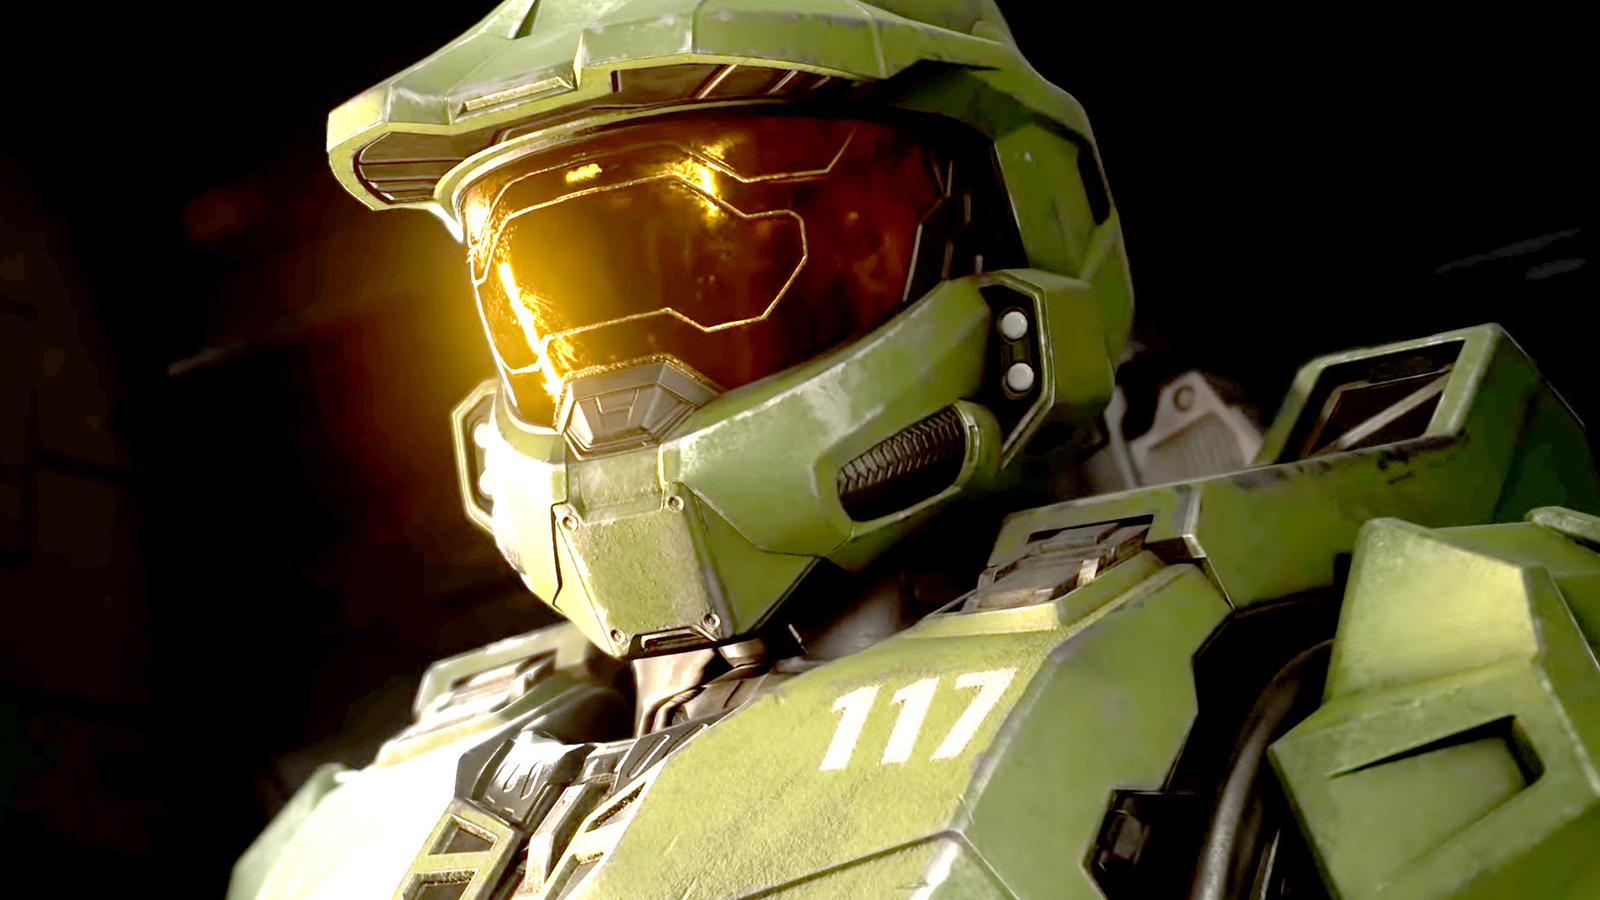 Halo TV Series Premiere Date Revealed In New Trailer